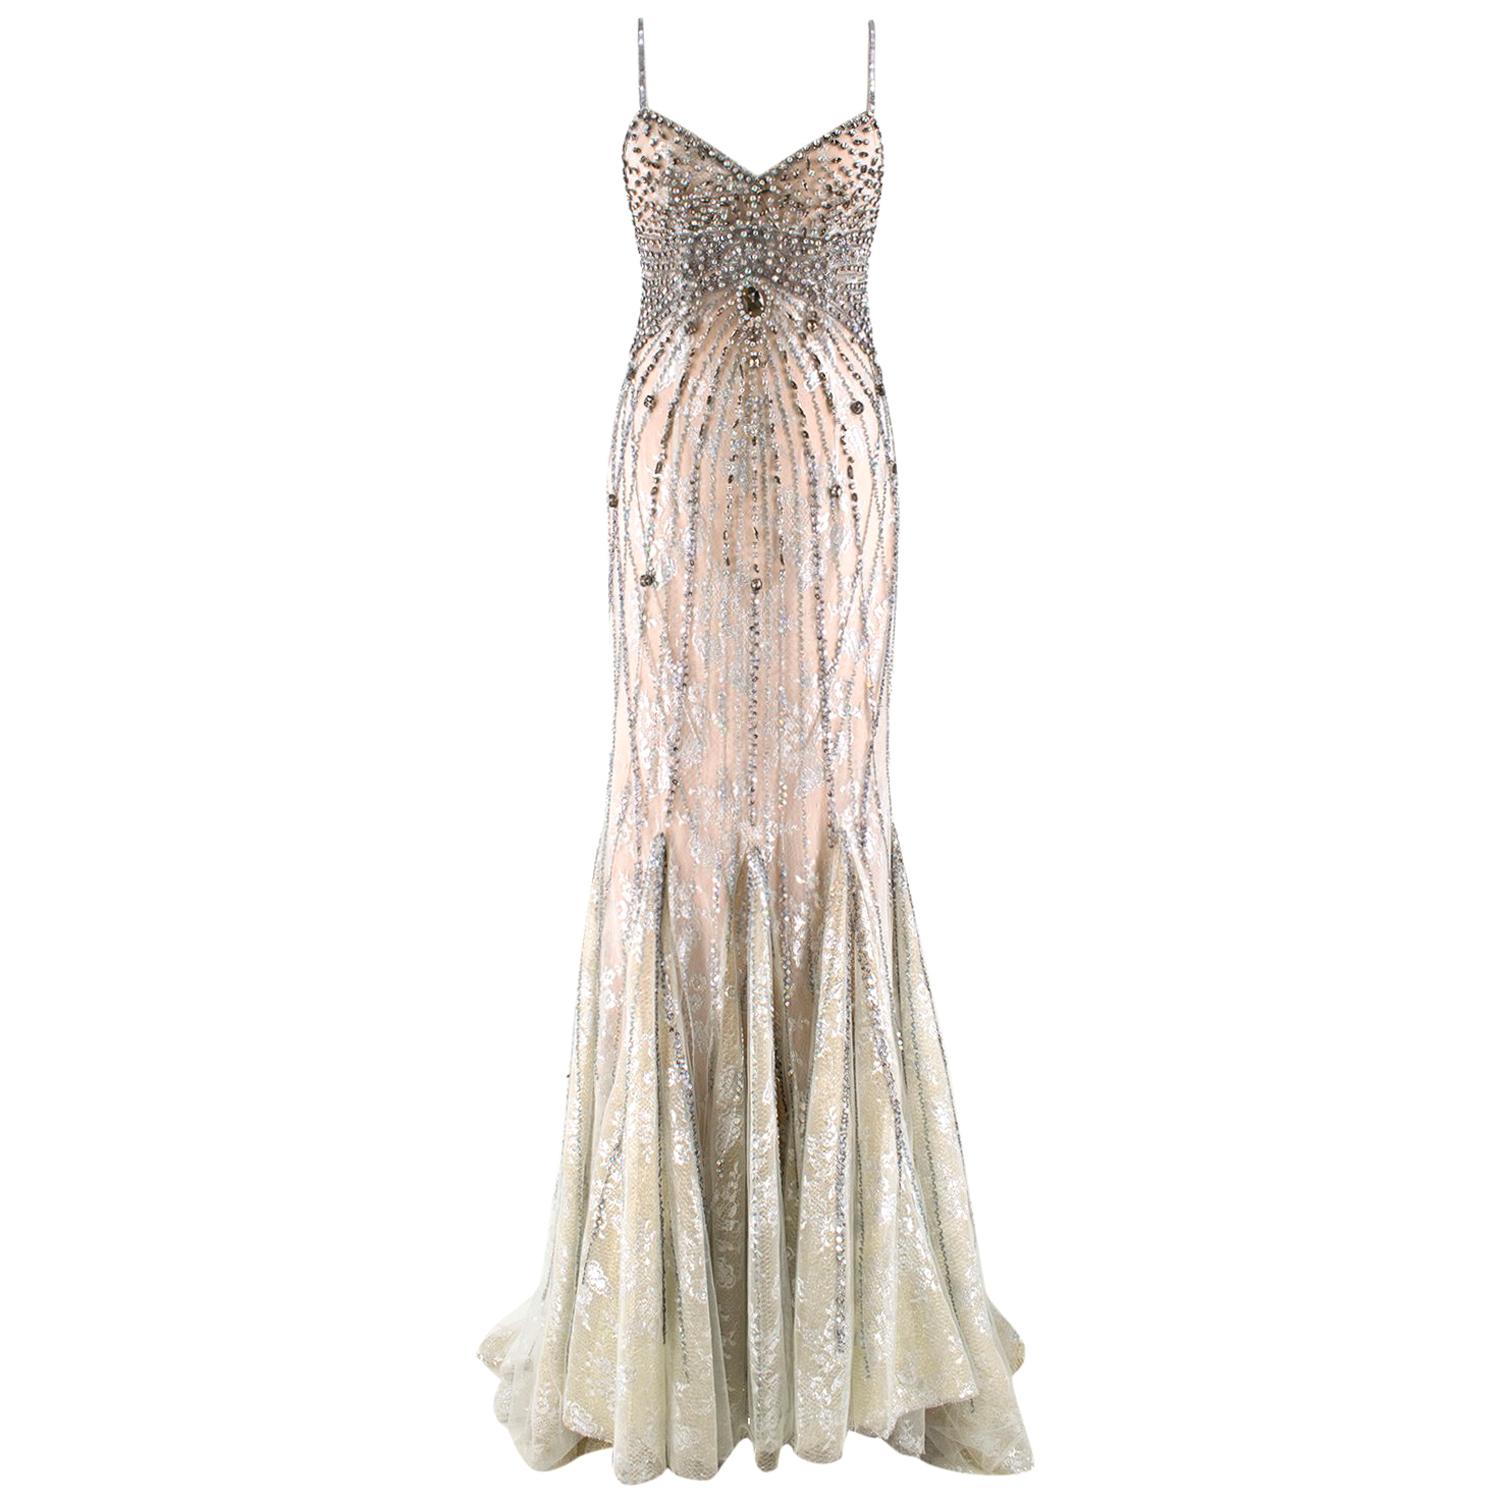 Bespoke Crystal Embellished Lace Gown US 8